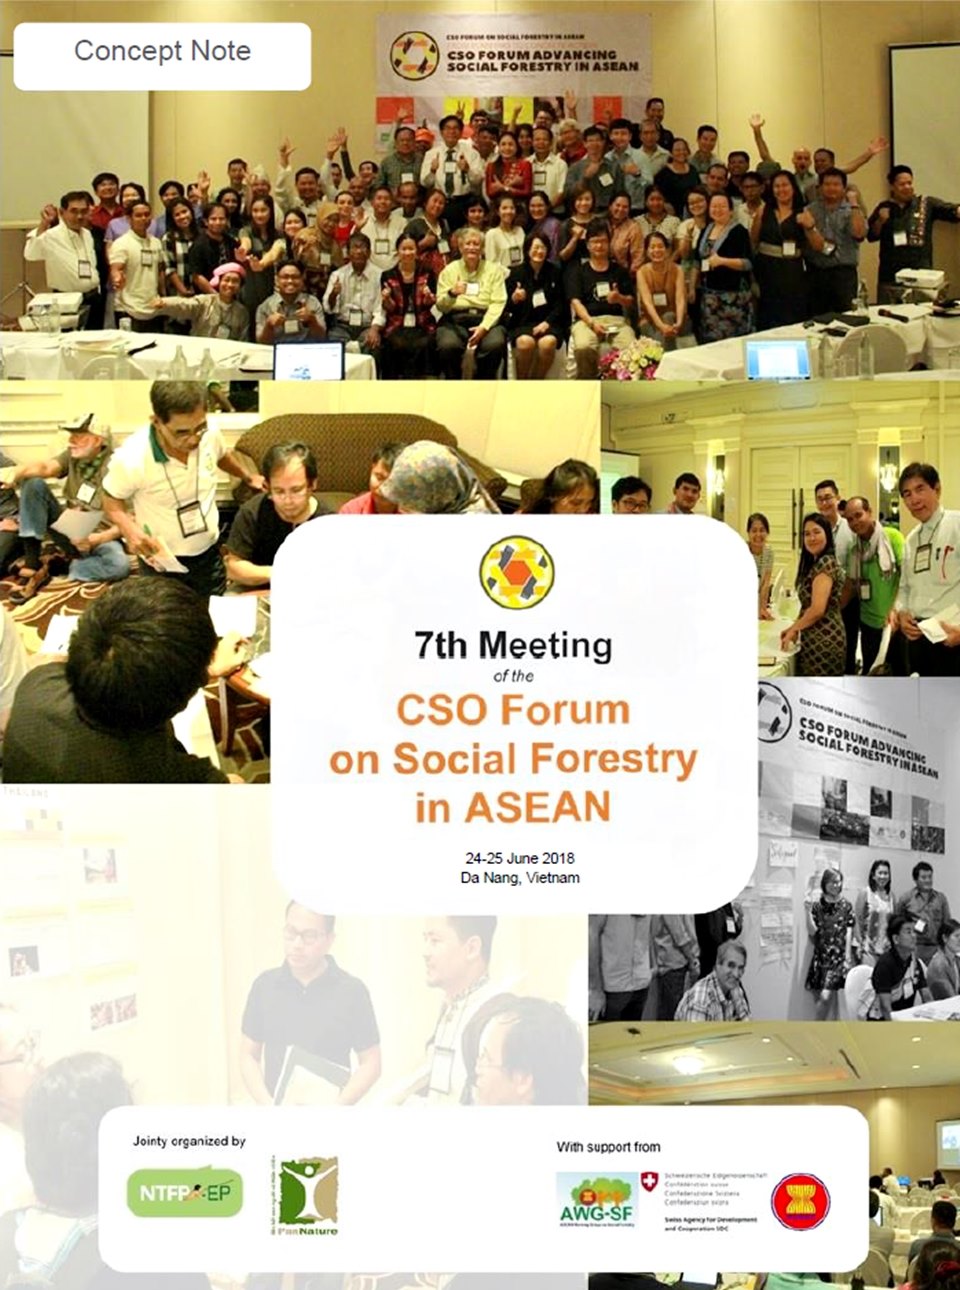 searca-holds-asrf-event-back-to-back-asean-regional-meetings-and-agroforestry-conference-da-nang-vietnam-02